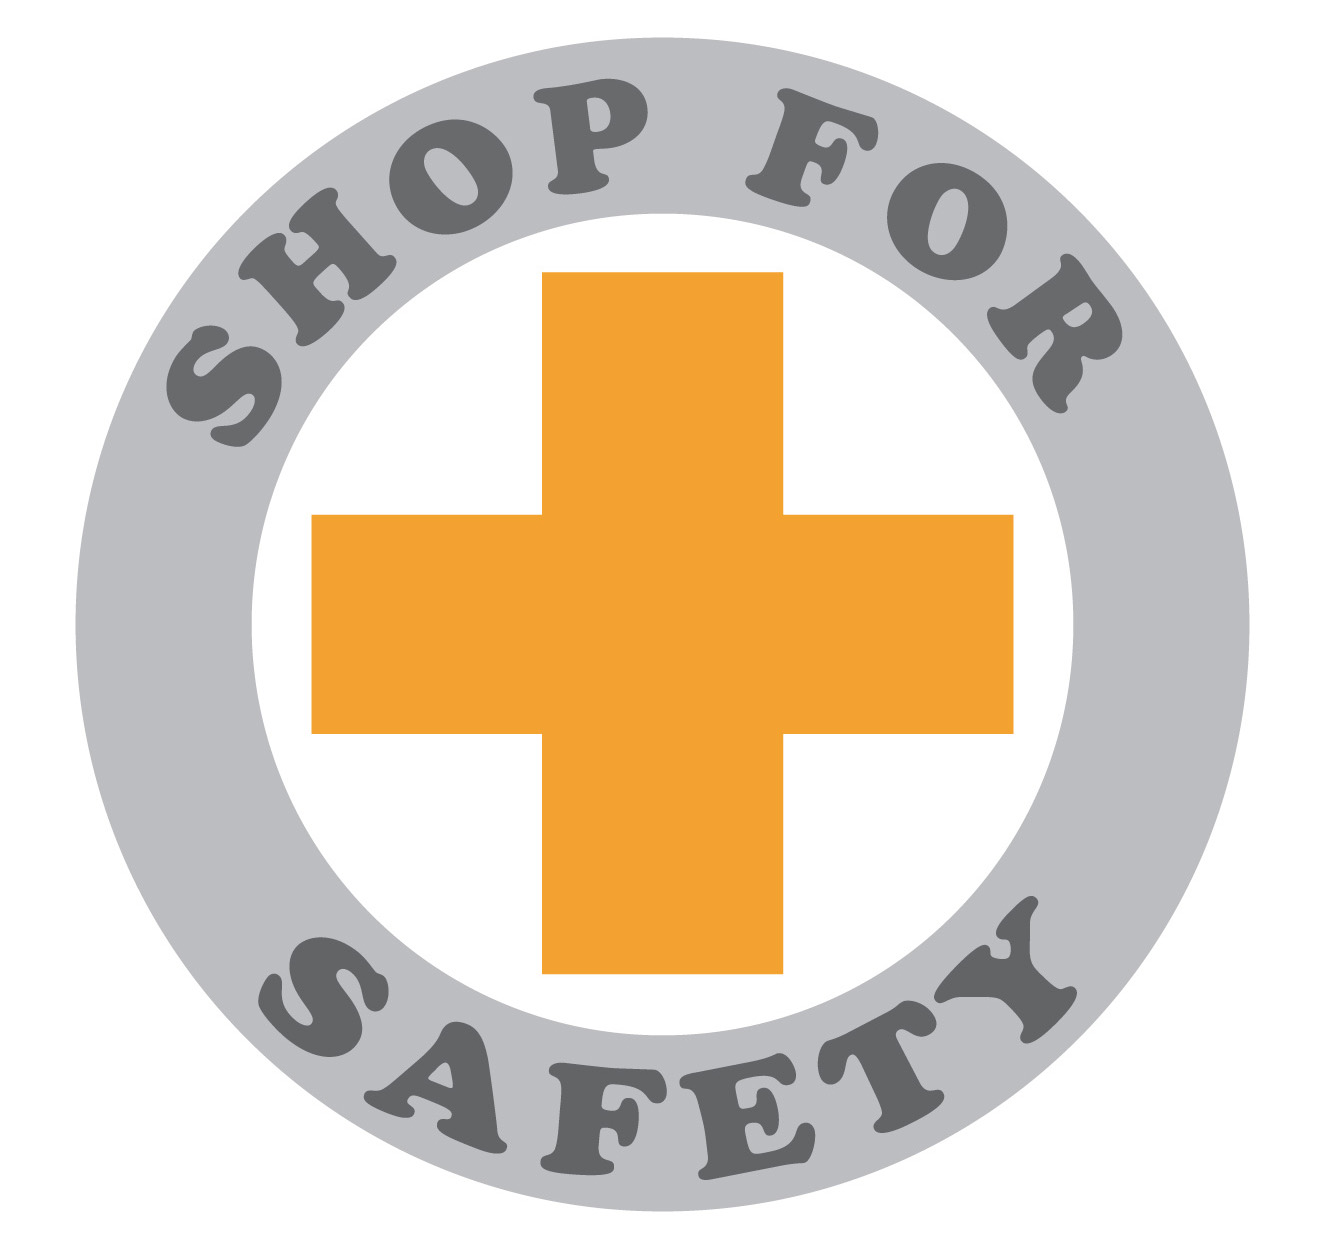 Shop For Safety